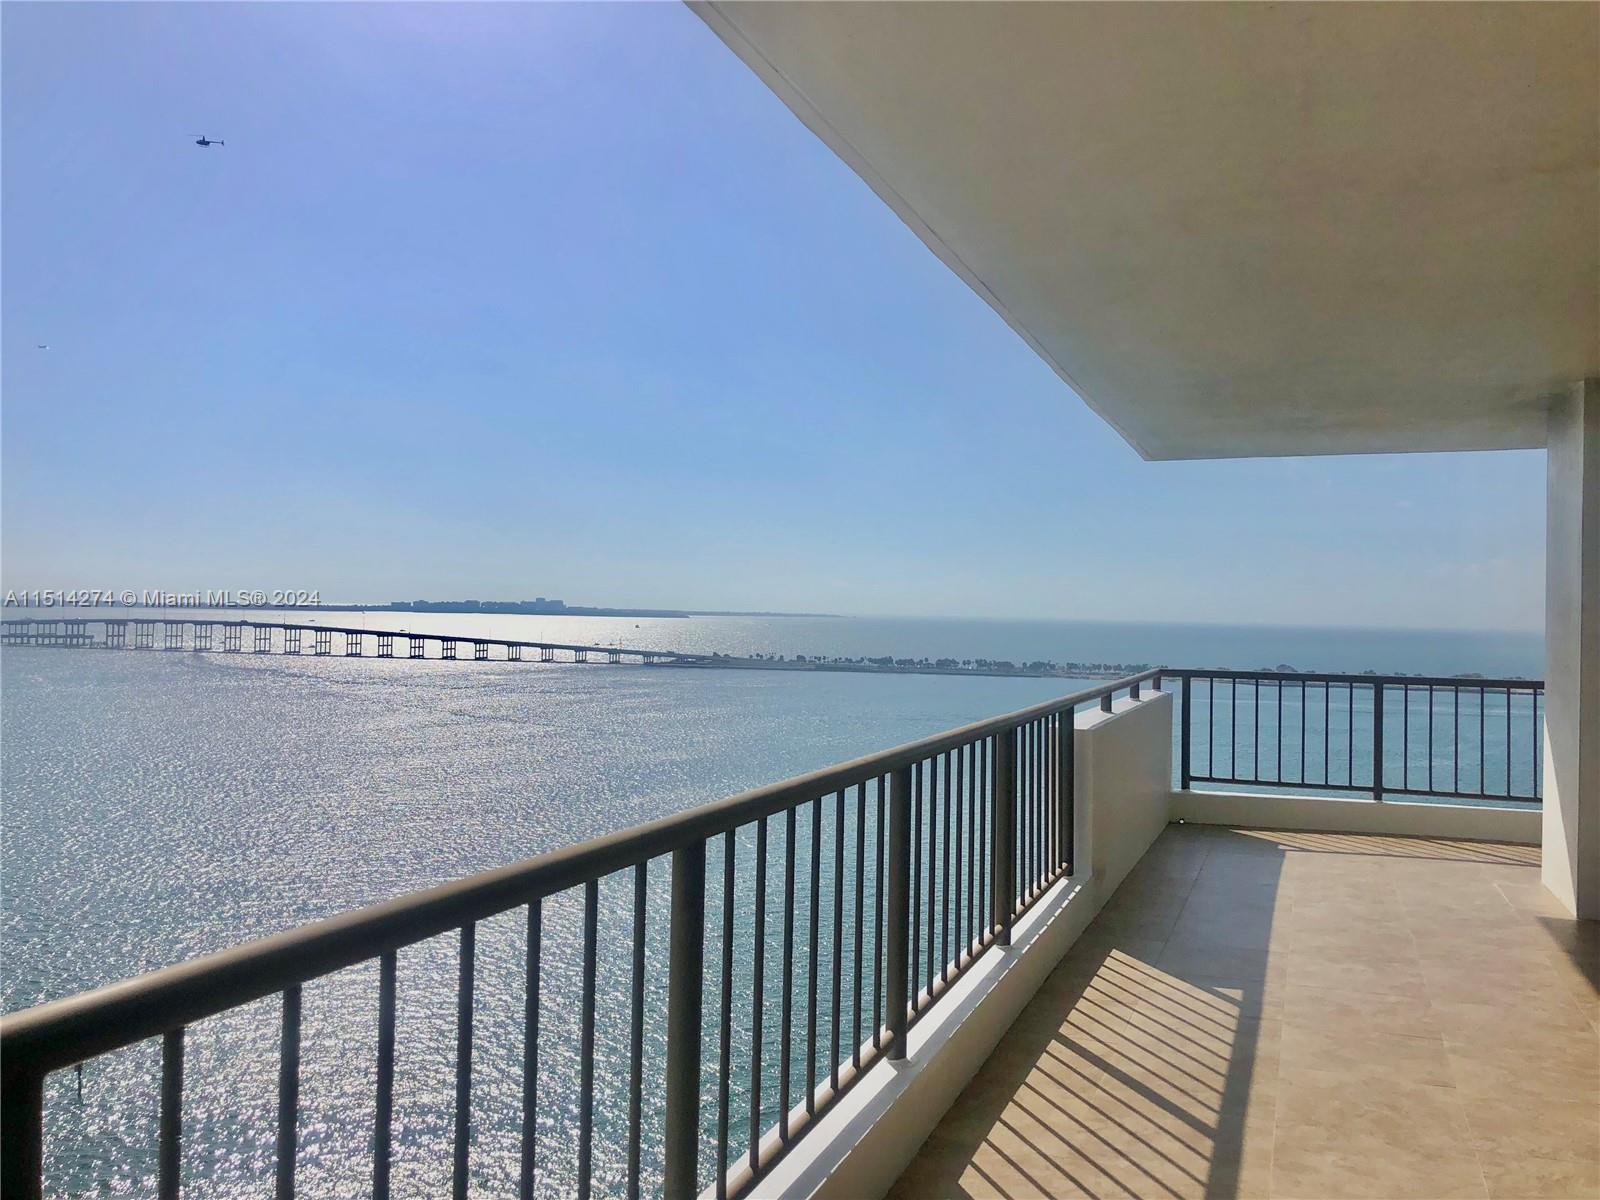 Desirable 01 line in Villa Regina East Tower, only 3 units per floor. Entire unit features wrap-around terrace with unobstructed views of Biscayne Bay and Ocean. Completely remodeled in 2010 with top of the line gourmet kitchen appliances, tile floors throughout, cedar walking closets, impact hurricane resistance windows, electric window treatments, costume doors and many more unique features throughout. Please see broker's remarks for showings.